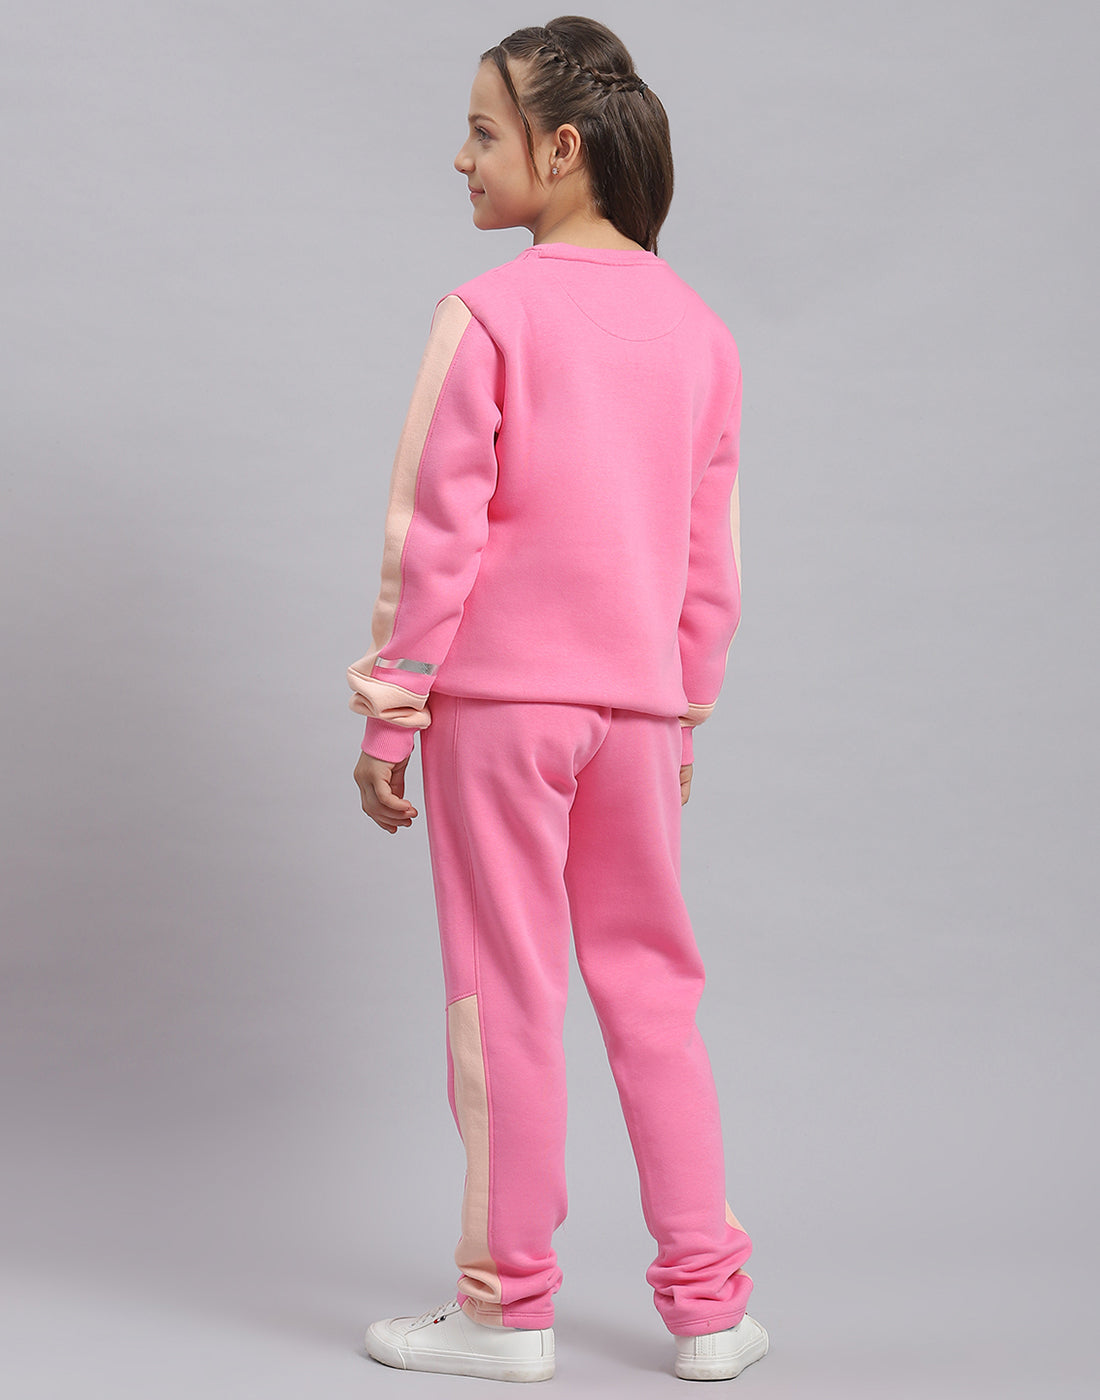 Girls Pink Printed Round Neck Full Sleeve Tracksuit